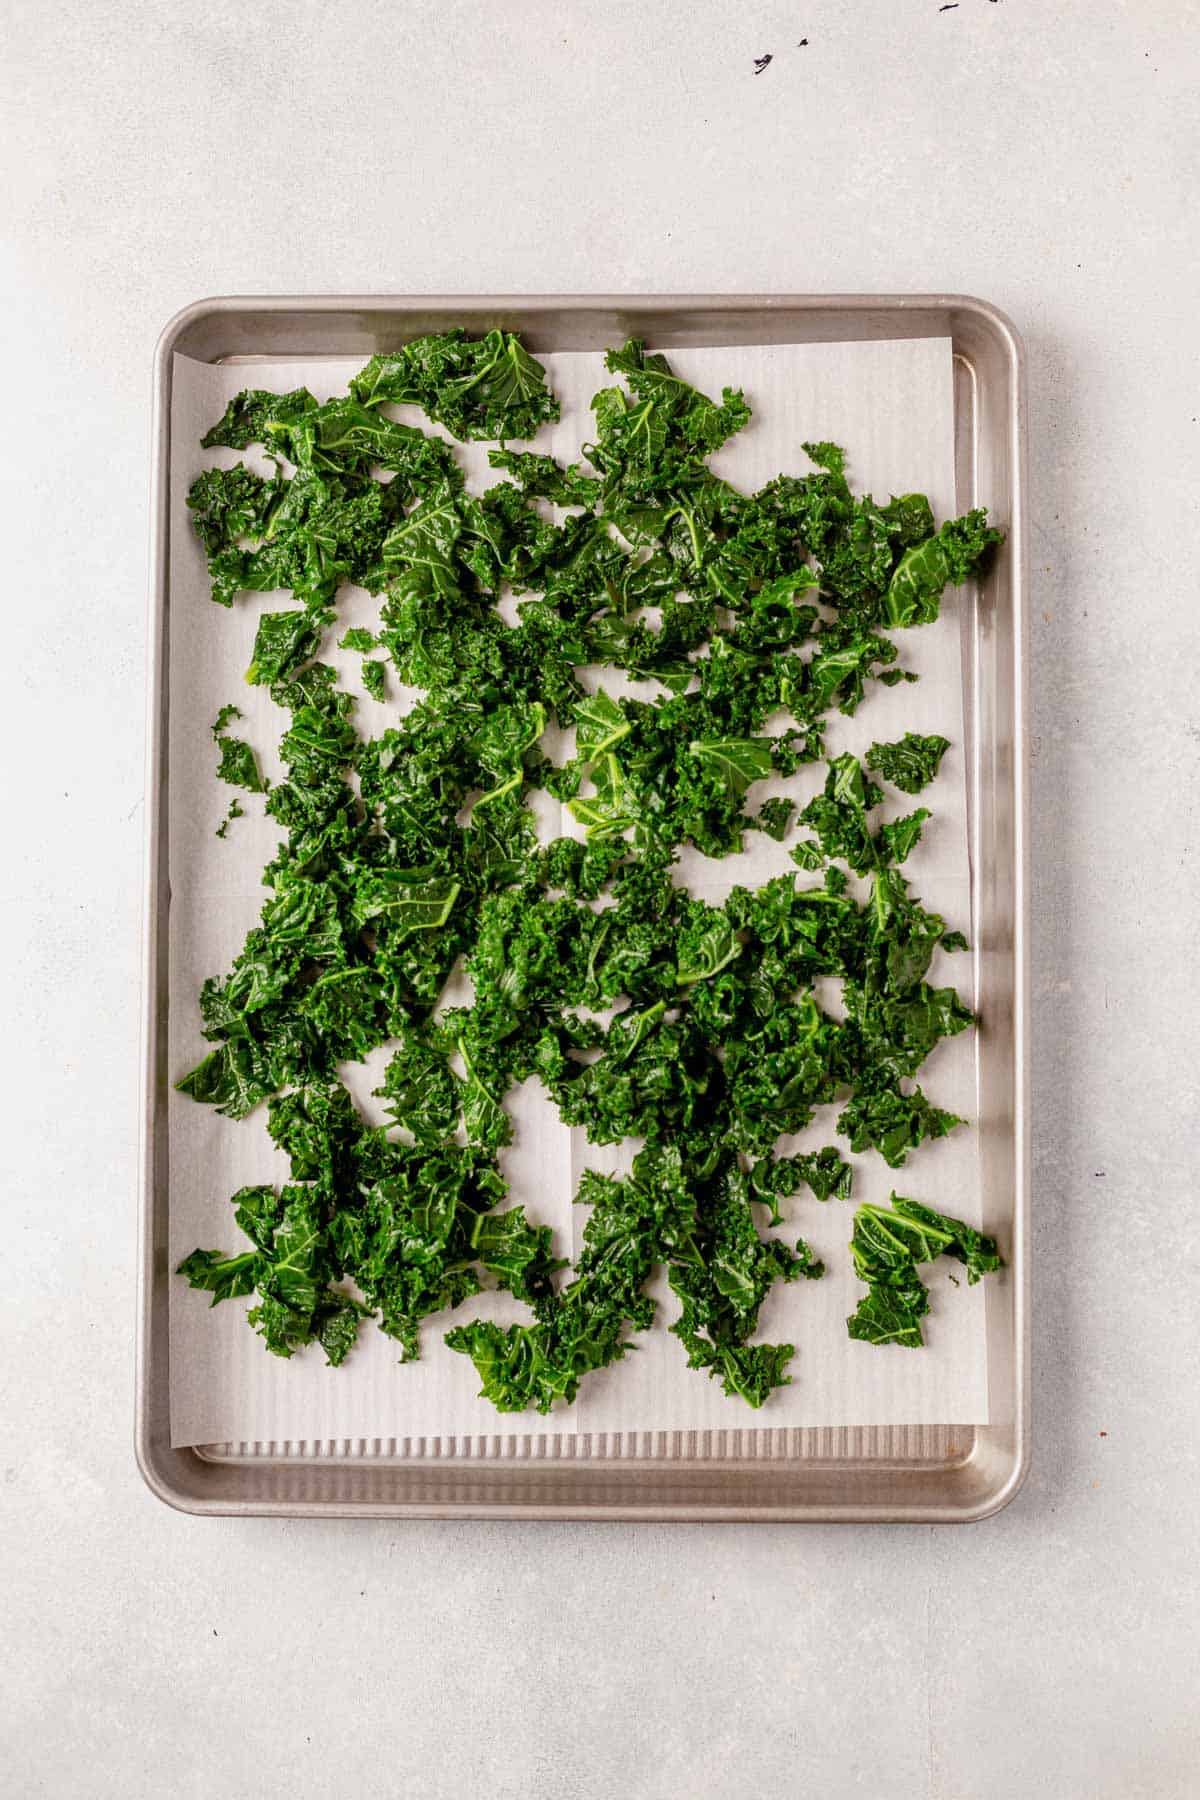 blanched and frozen kale on a baking sheet